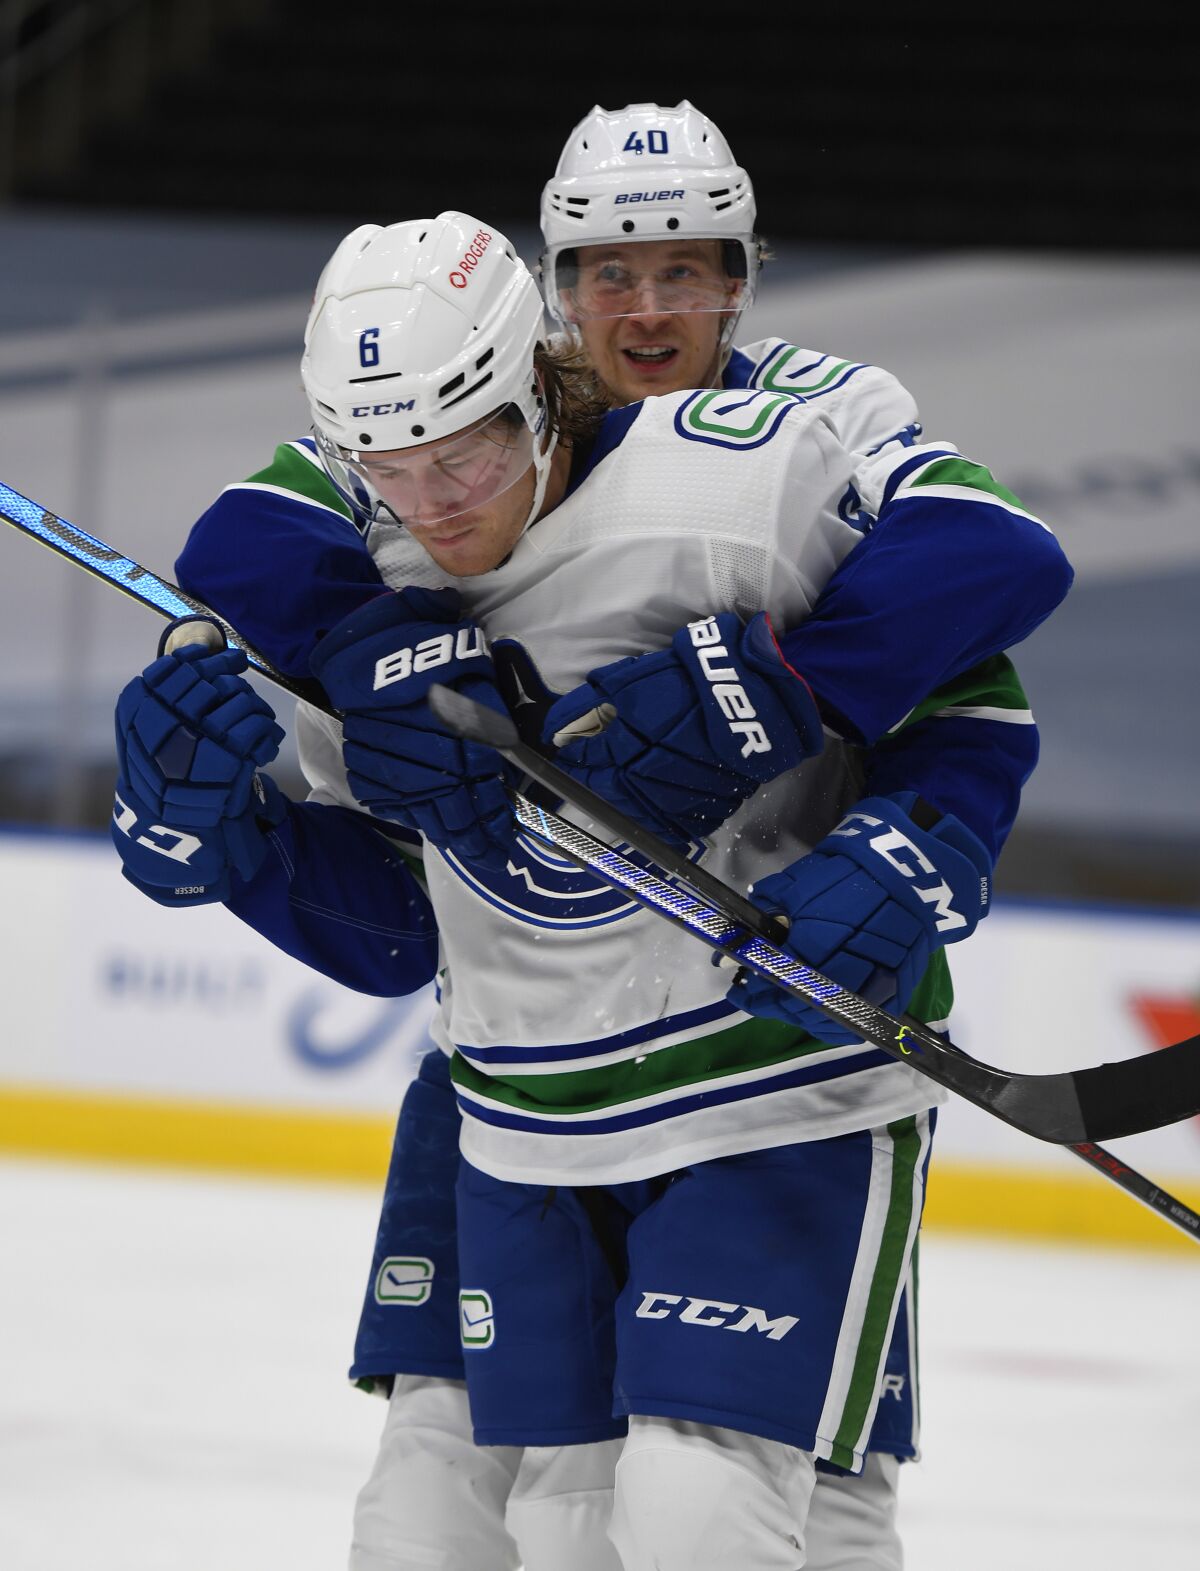 Vancouver Canucks' Brock Boeser (6) and Elias Pettersson (40) celebrate a goal against the Edmonton Oilers during the third period of an NHL hockey game Wednesday, Jan. 13, 2021, in Edmonton, Alberta. (Dale MacMillan/The Canadian Press via AP)